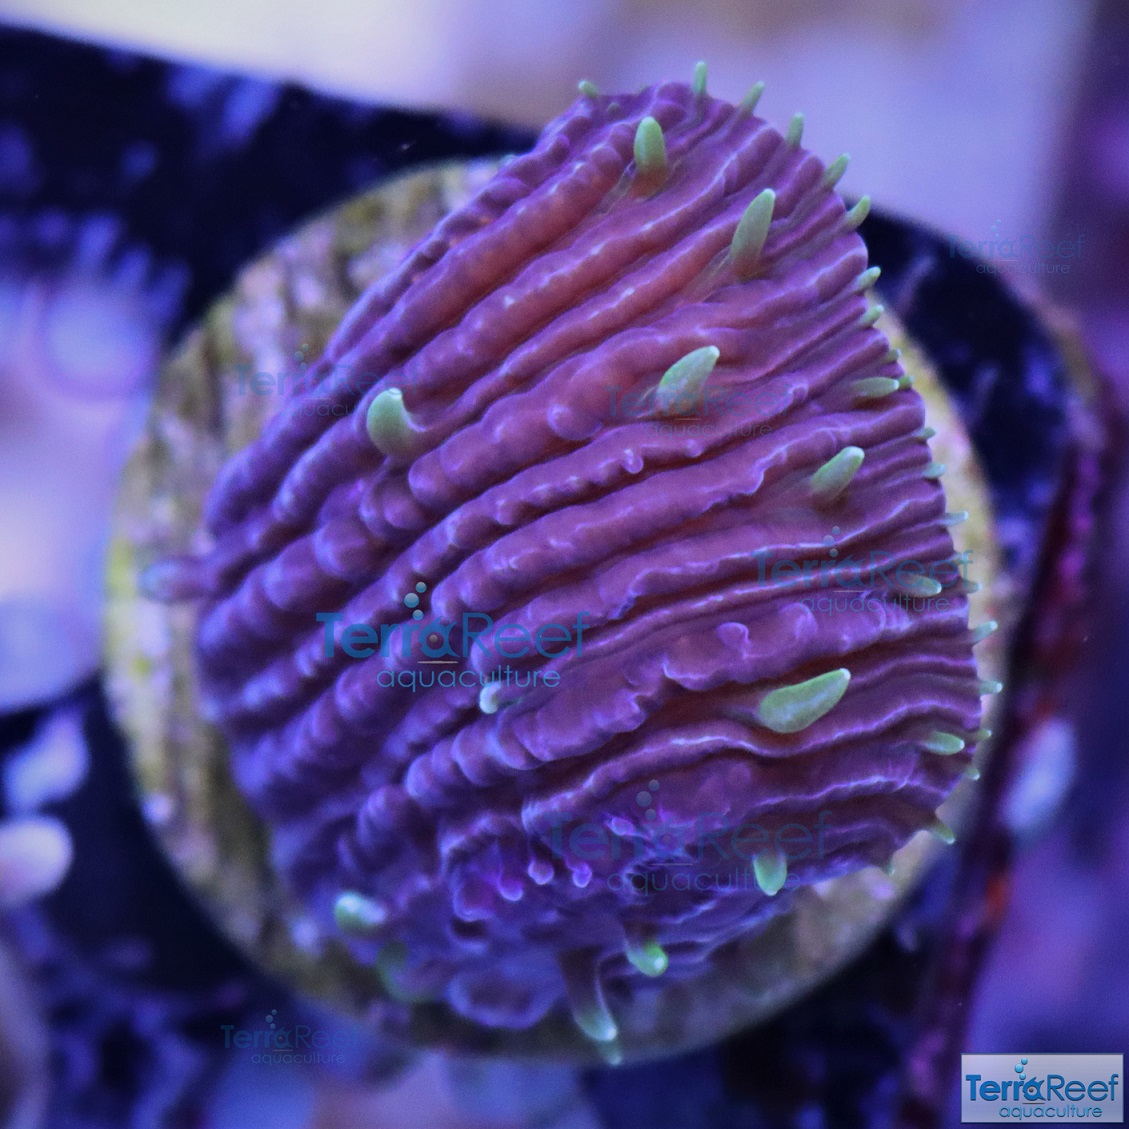 IMG_6301-Fungia-Plate-Coral-Project-X-Fungid-Small.jpg